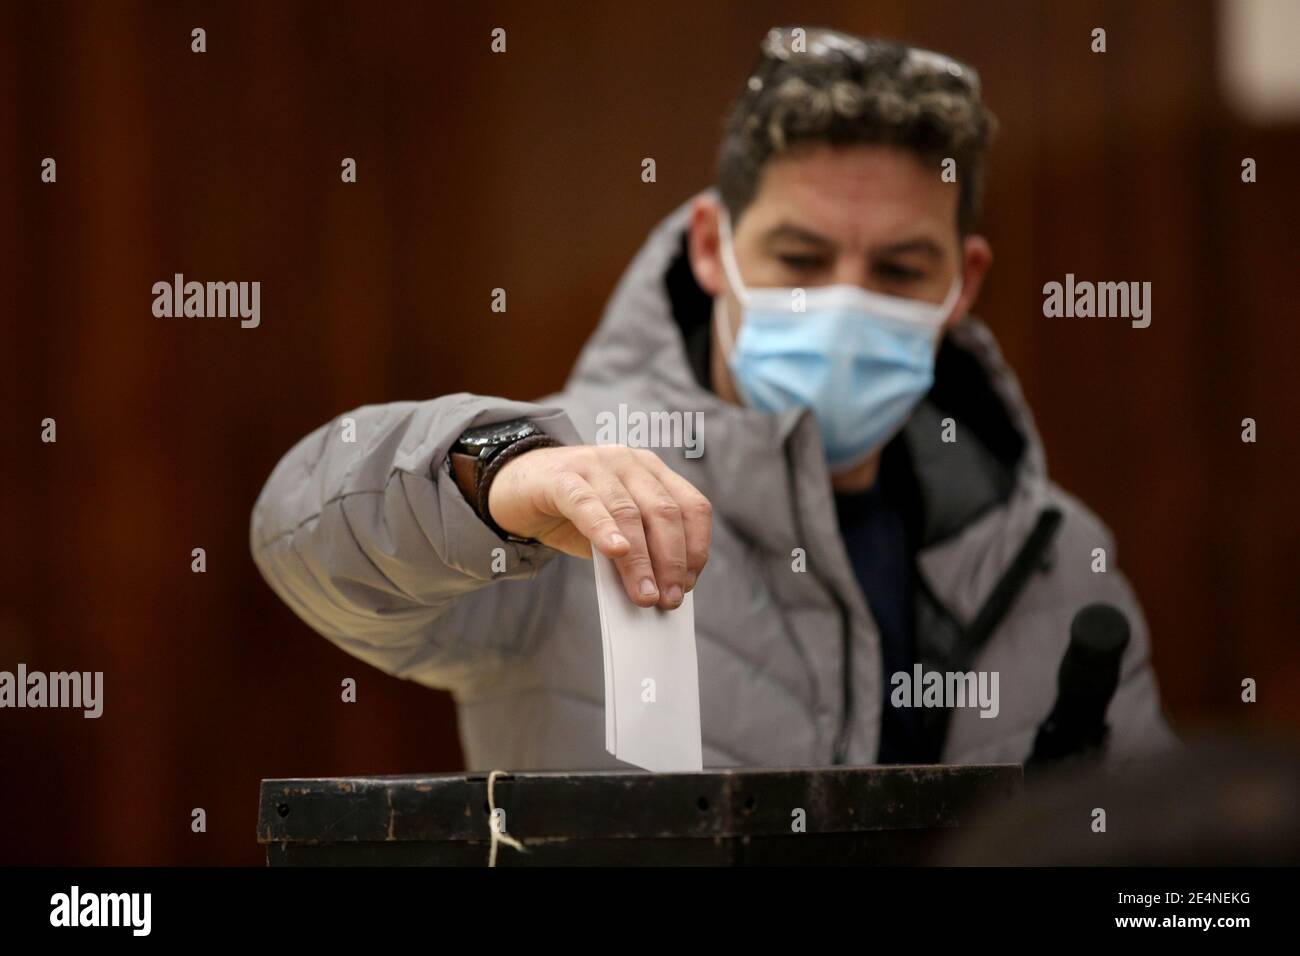 Lisbon, Portugal. 24th Jan, 2021. A man wearing a mask casts his ballot at a polling station in Lisbon, Portugal, on Jan. 24, 2021. Portugal's presidential election kicked off on Sunday, with nearly 11 million people eligible to vote and concerns over high abstention levels. Credit: Pedro Fiuza/Xinhua/Alamy Live News Stock Photo